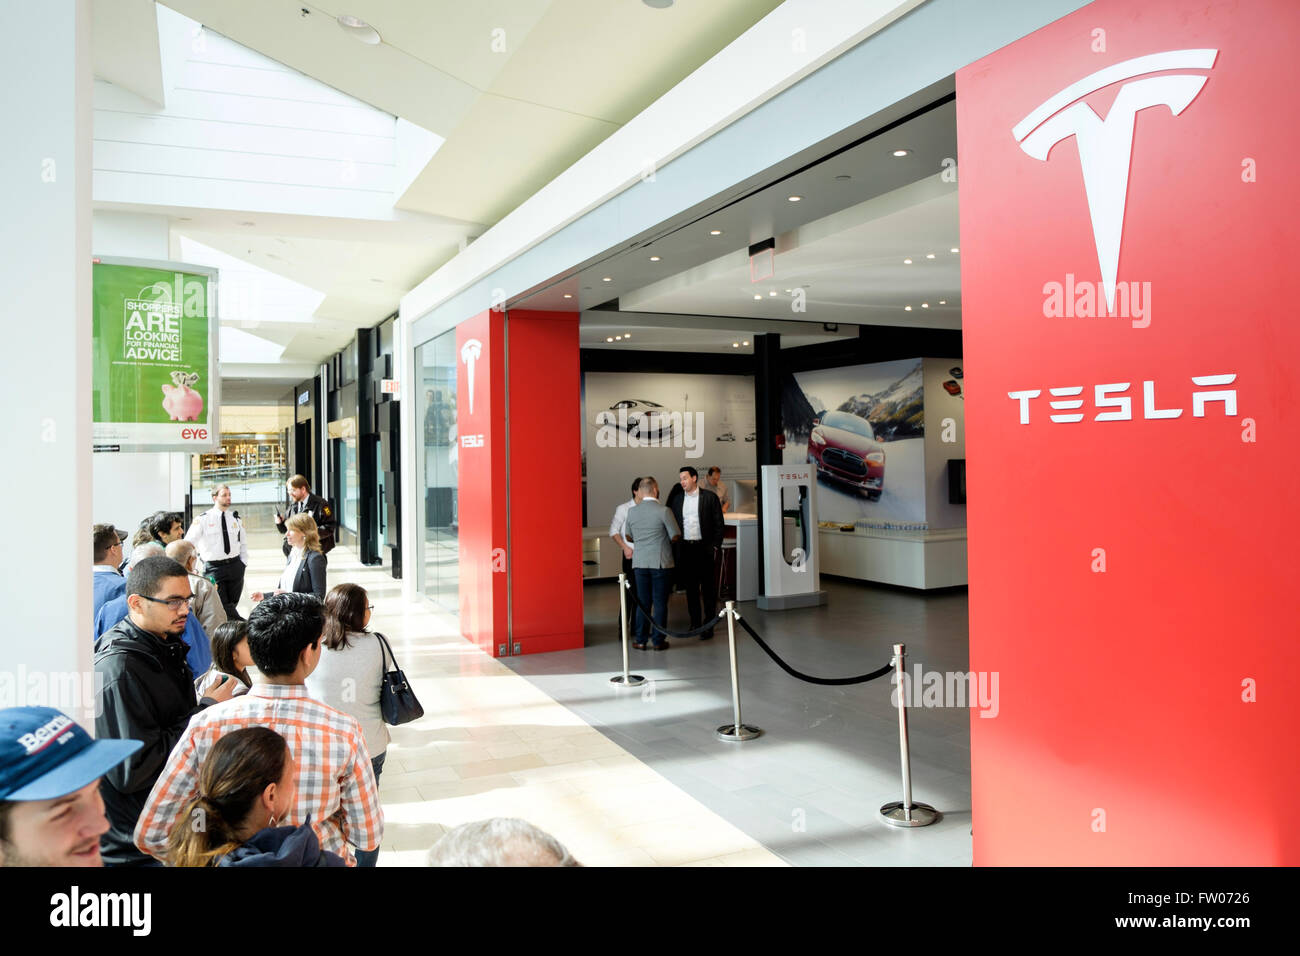 California, USA. 31st Mar, 2016. Automotive history is being made around the world today as customers line up at Tesla Motors stores and galleries to reserve a car they haven't seen yet. The Tesla Model 3 is unveiled at 8.30pm PDT on March 31st in California, USA. Credit:  Thomas Bland/Alamy Live News Stock Photo